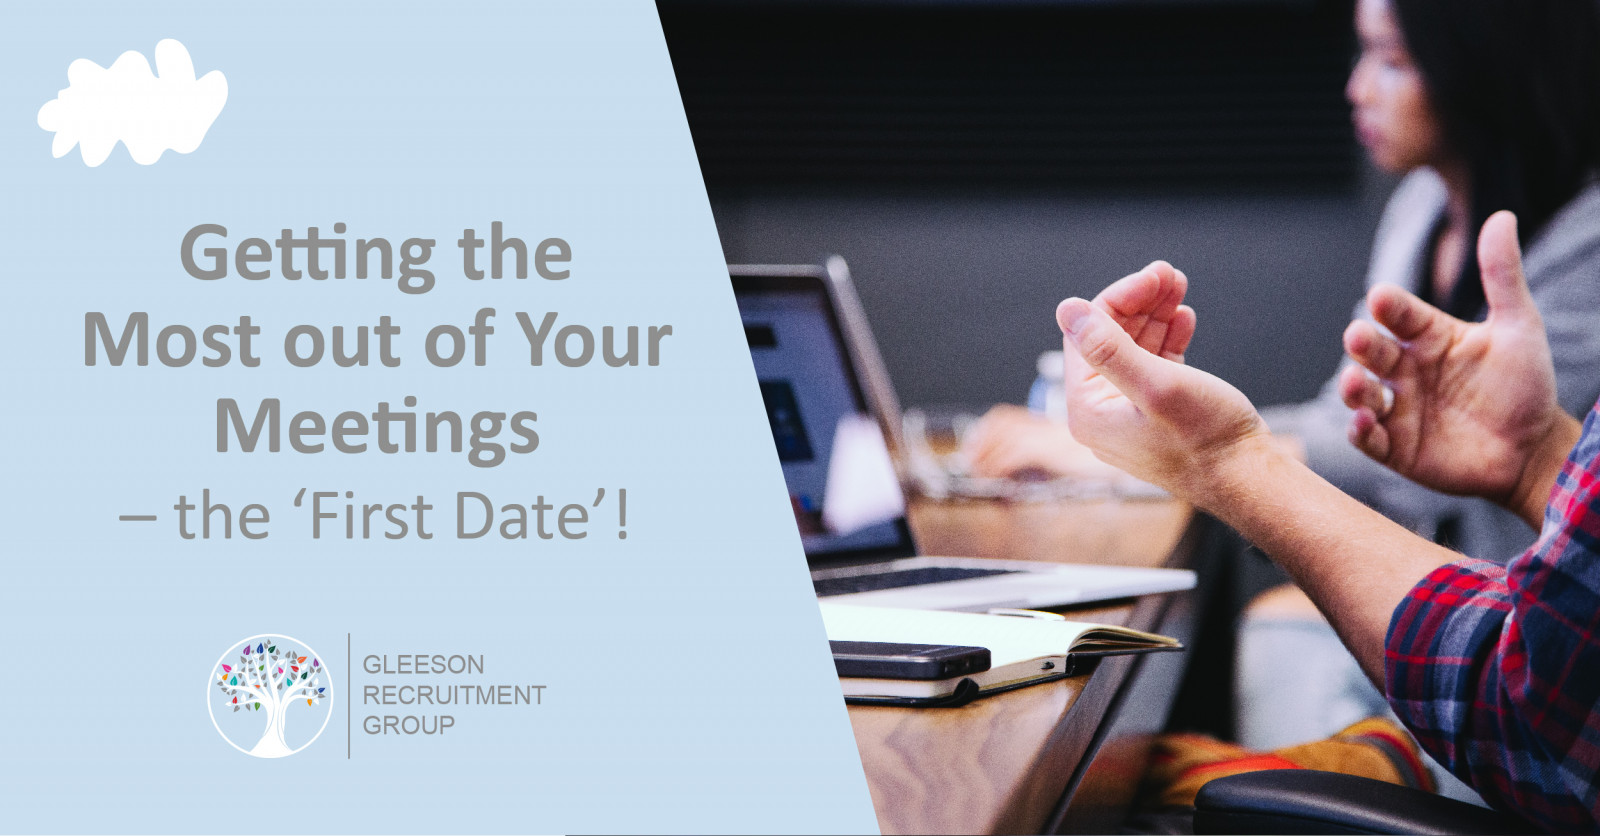 Getting the Most out of Your Meetings